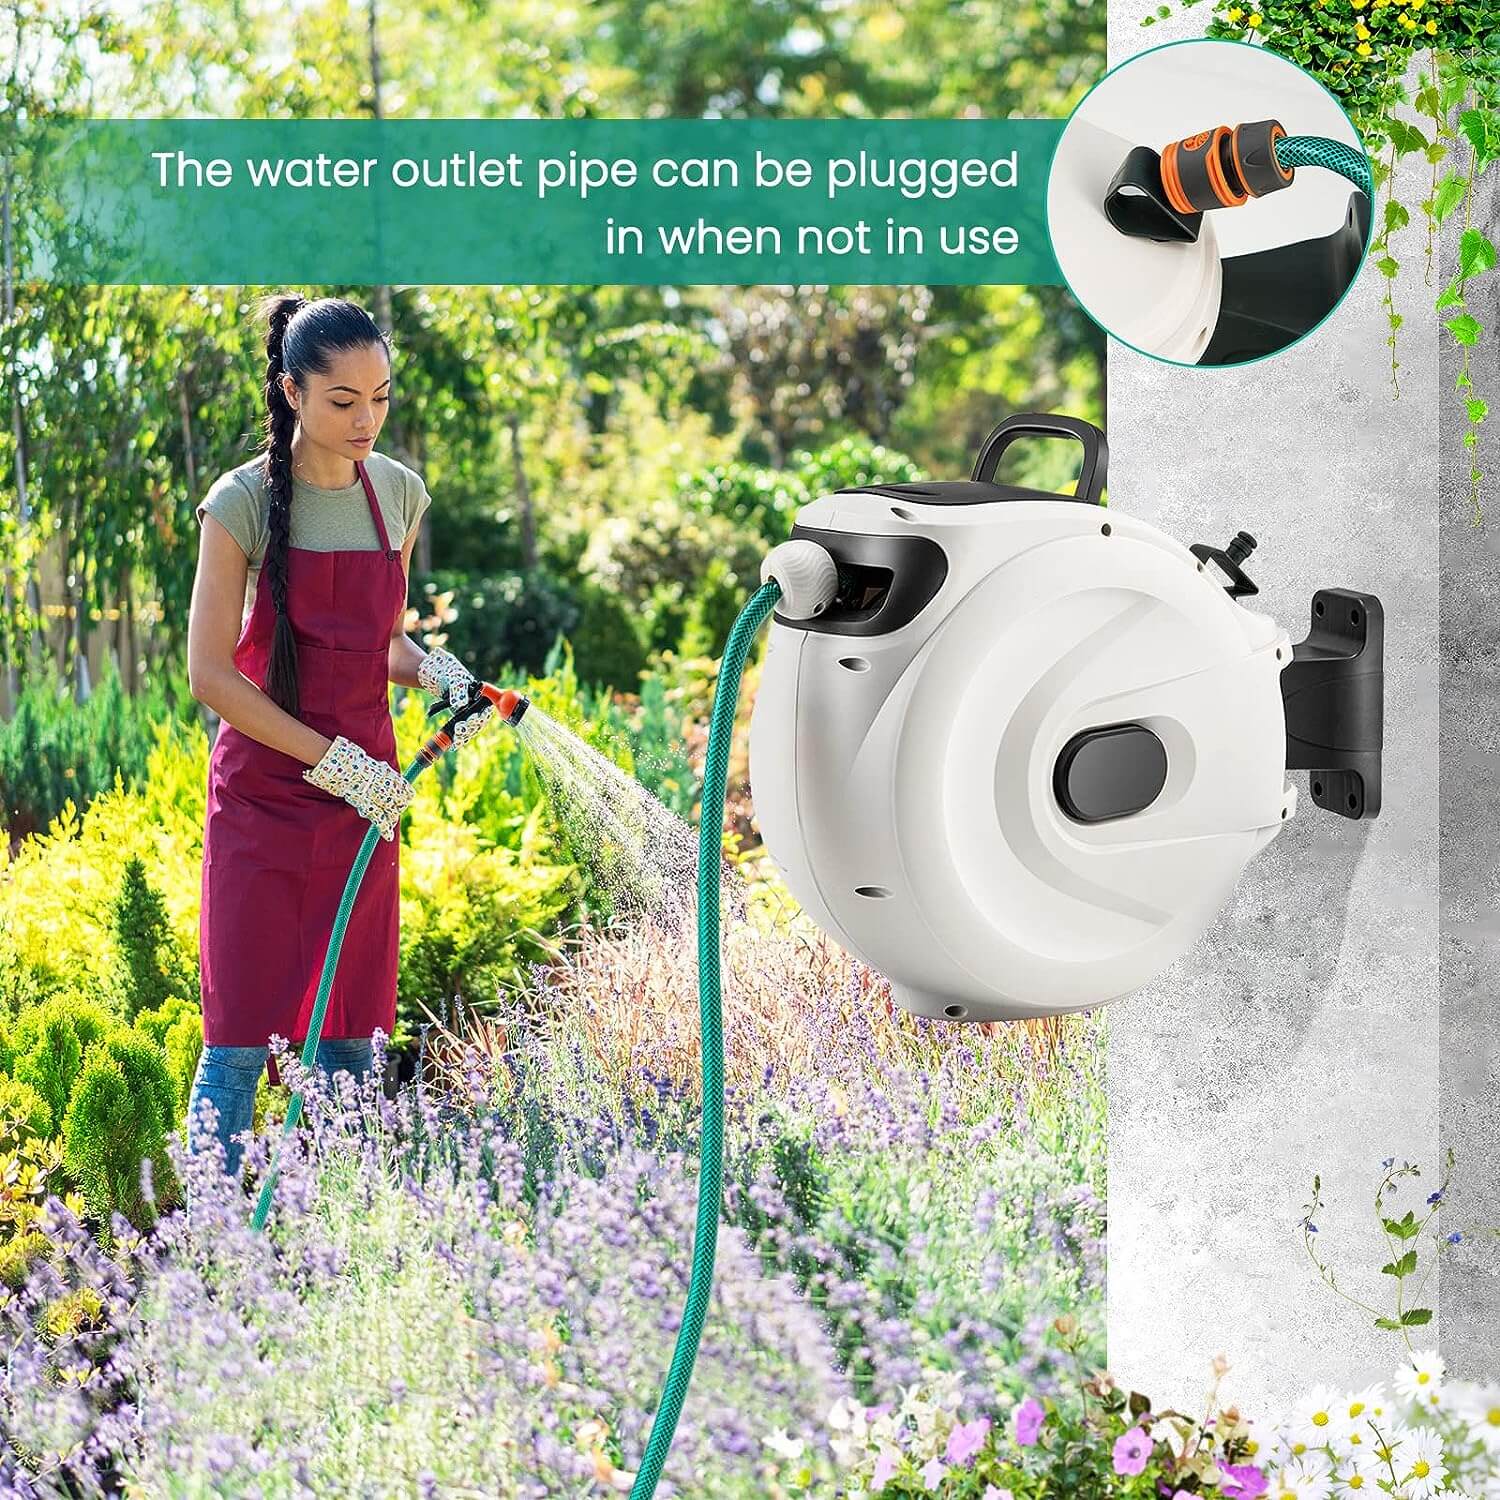 The iToolMax telescoping water hose reel can be locked to any length as needed, and the integrated hose guide automatically winds back and forth to ensure that the hose is pulled neatly and evenly into the hose reel every time, making your life easier!